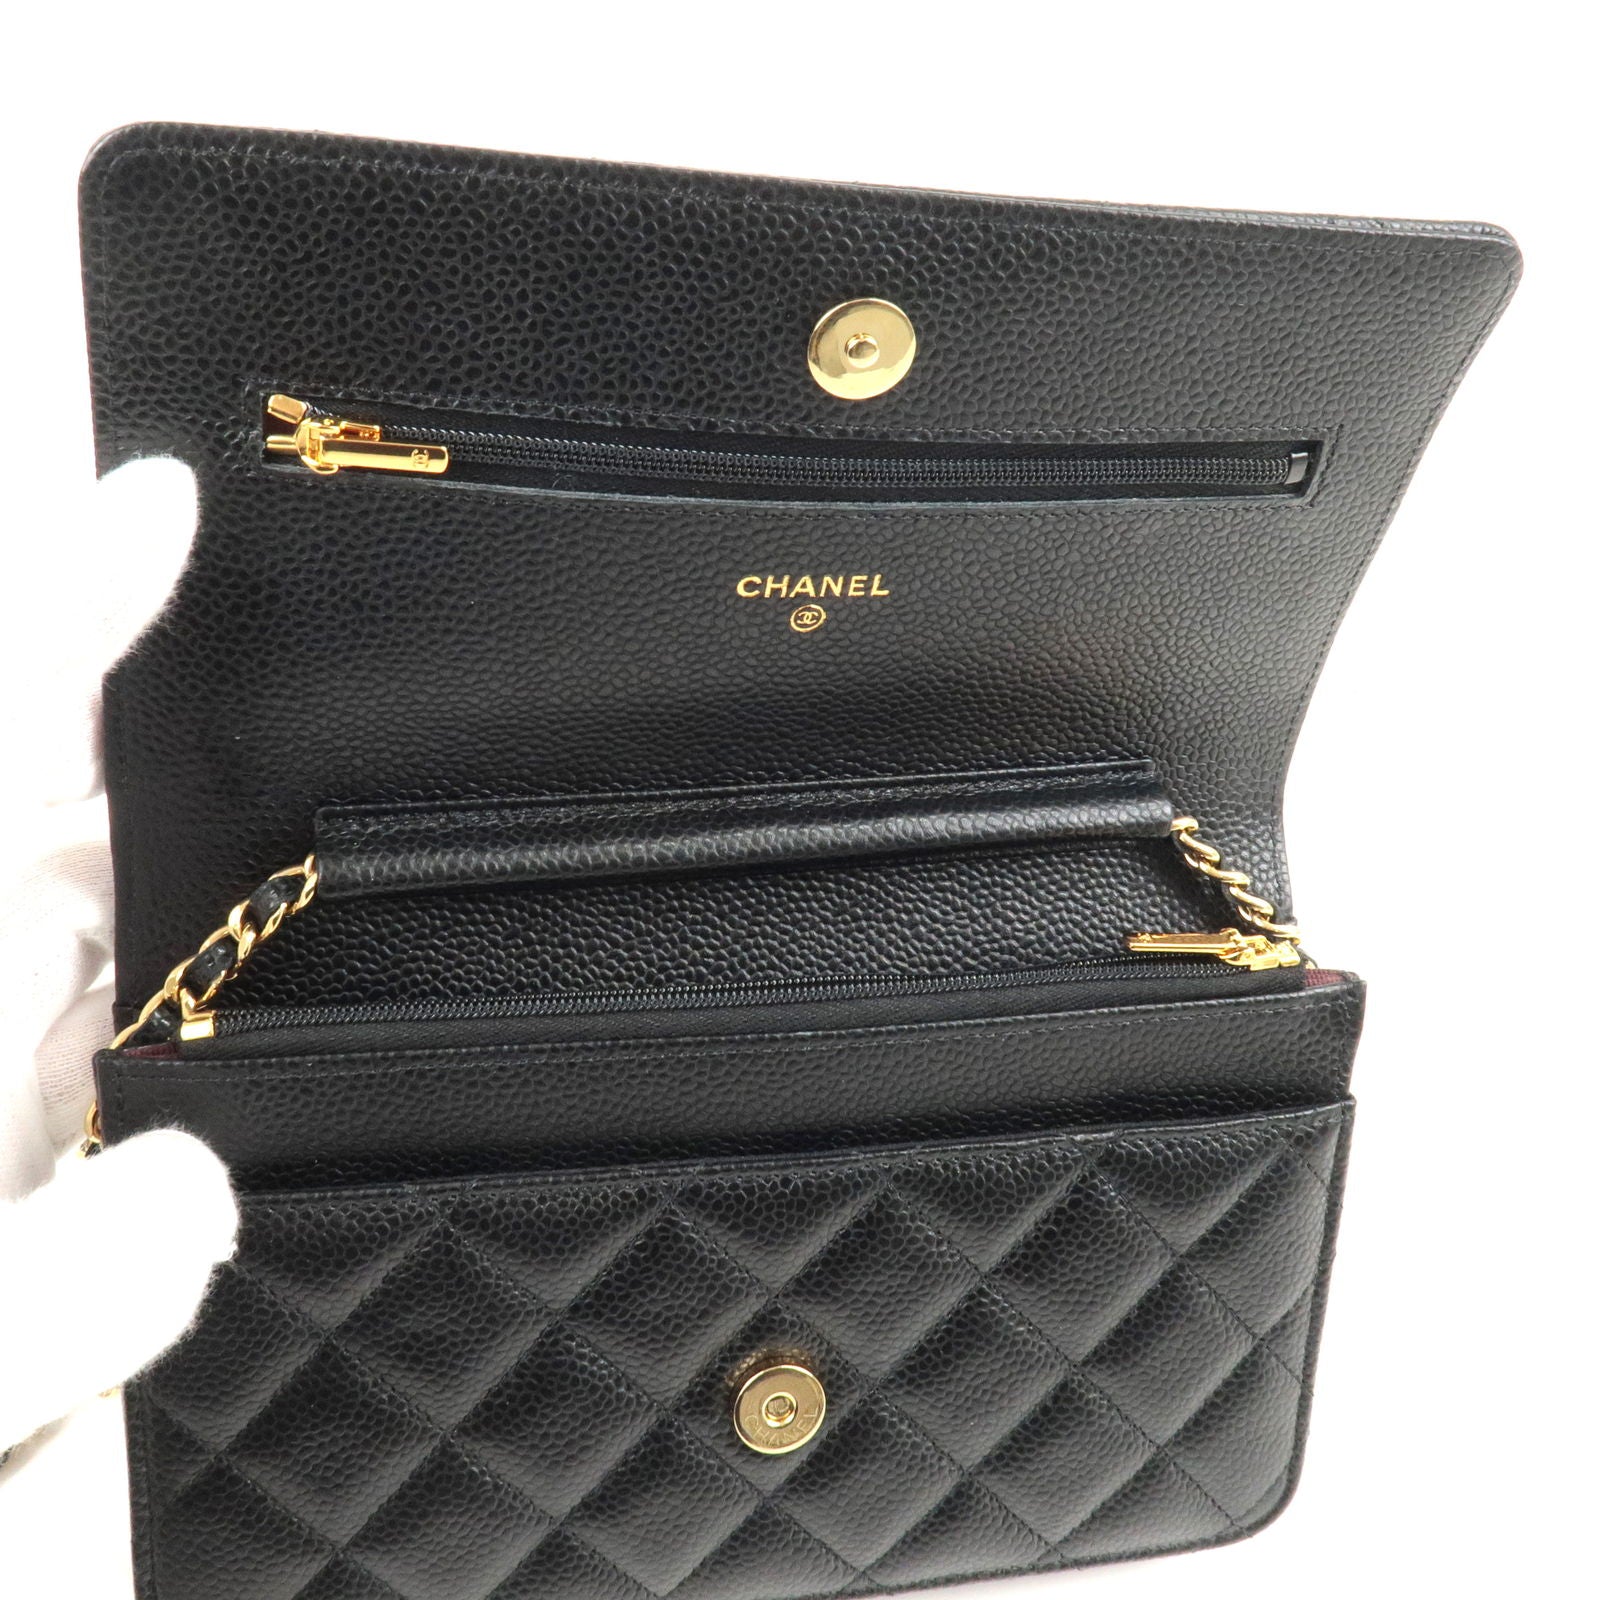 Matelasse - ep_vintage luxury Store - Caviar - WOC - Black - CHANEL - Skin  - Chanel Pre-Owned 1995 diamond-quilted 2 in 1 bag - Wallet - AP0250 – dct  - GHW - Chain